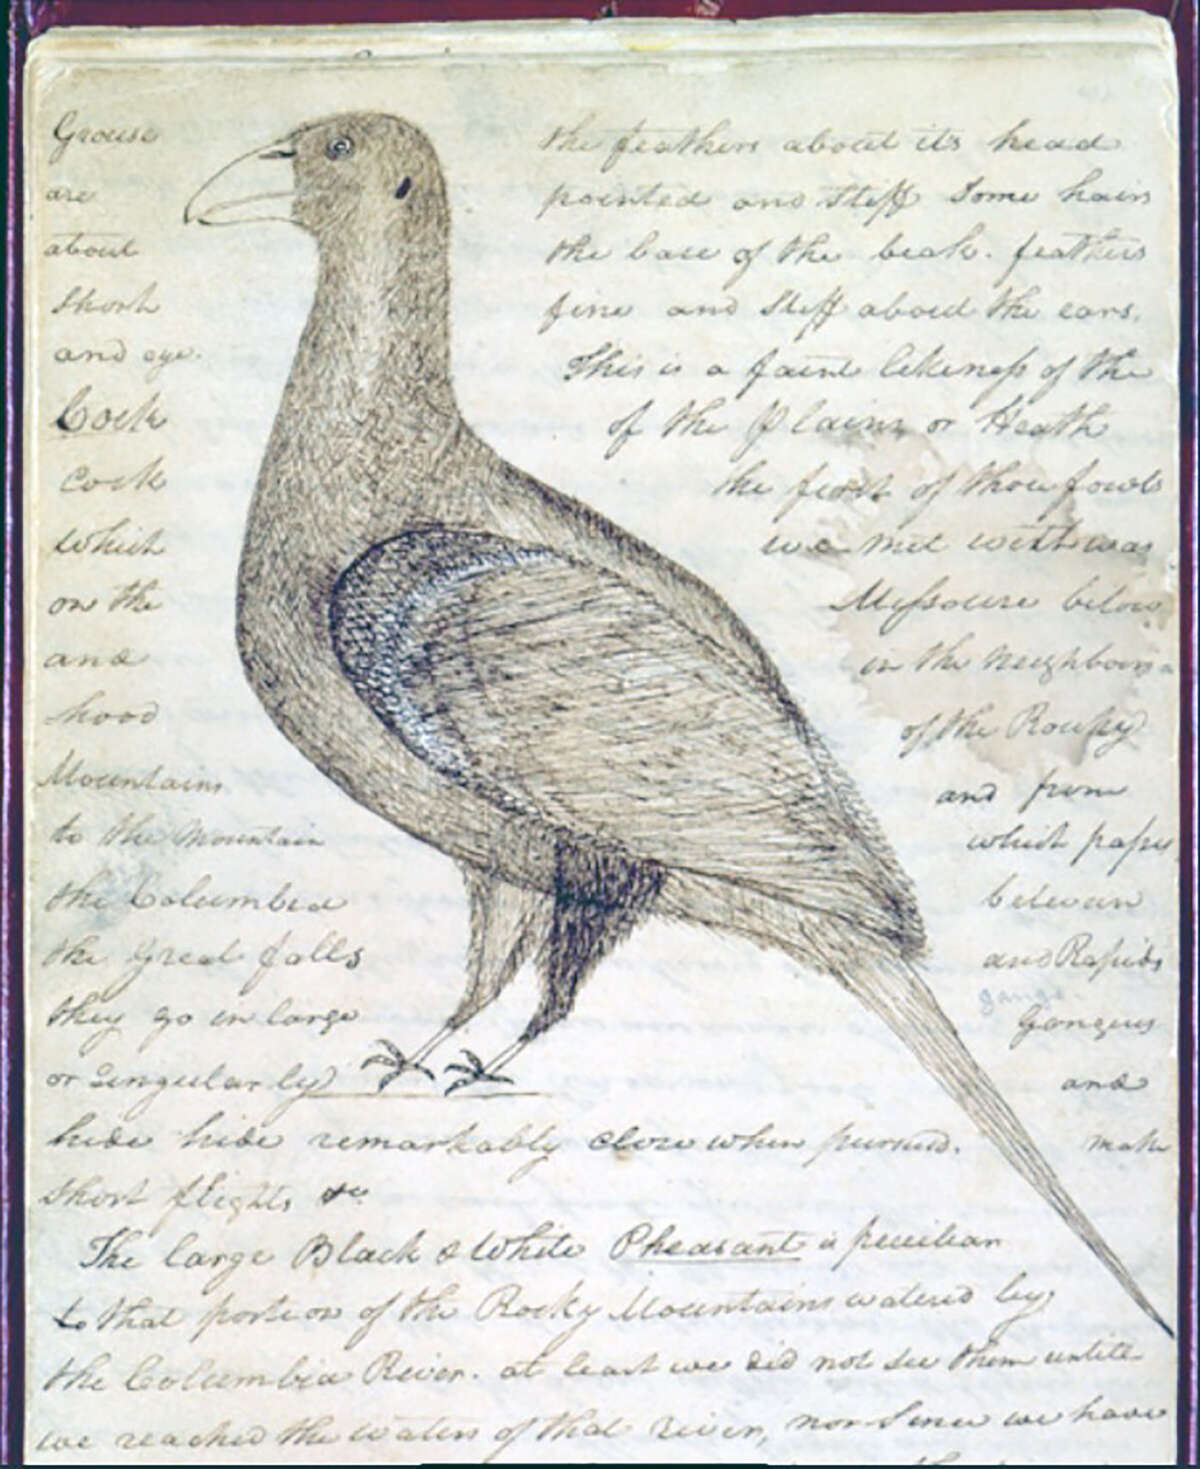 A sketch of a bird drawn by William Clark during the Lewis & Clark Expedition includes details about the bird. 